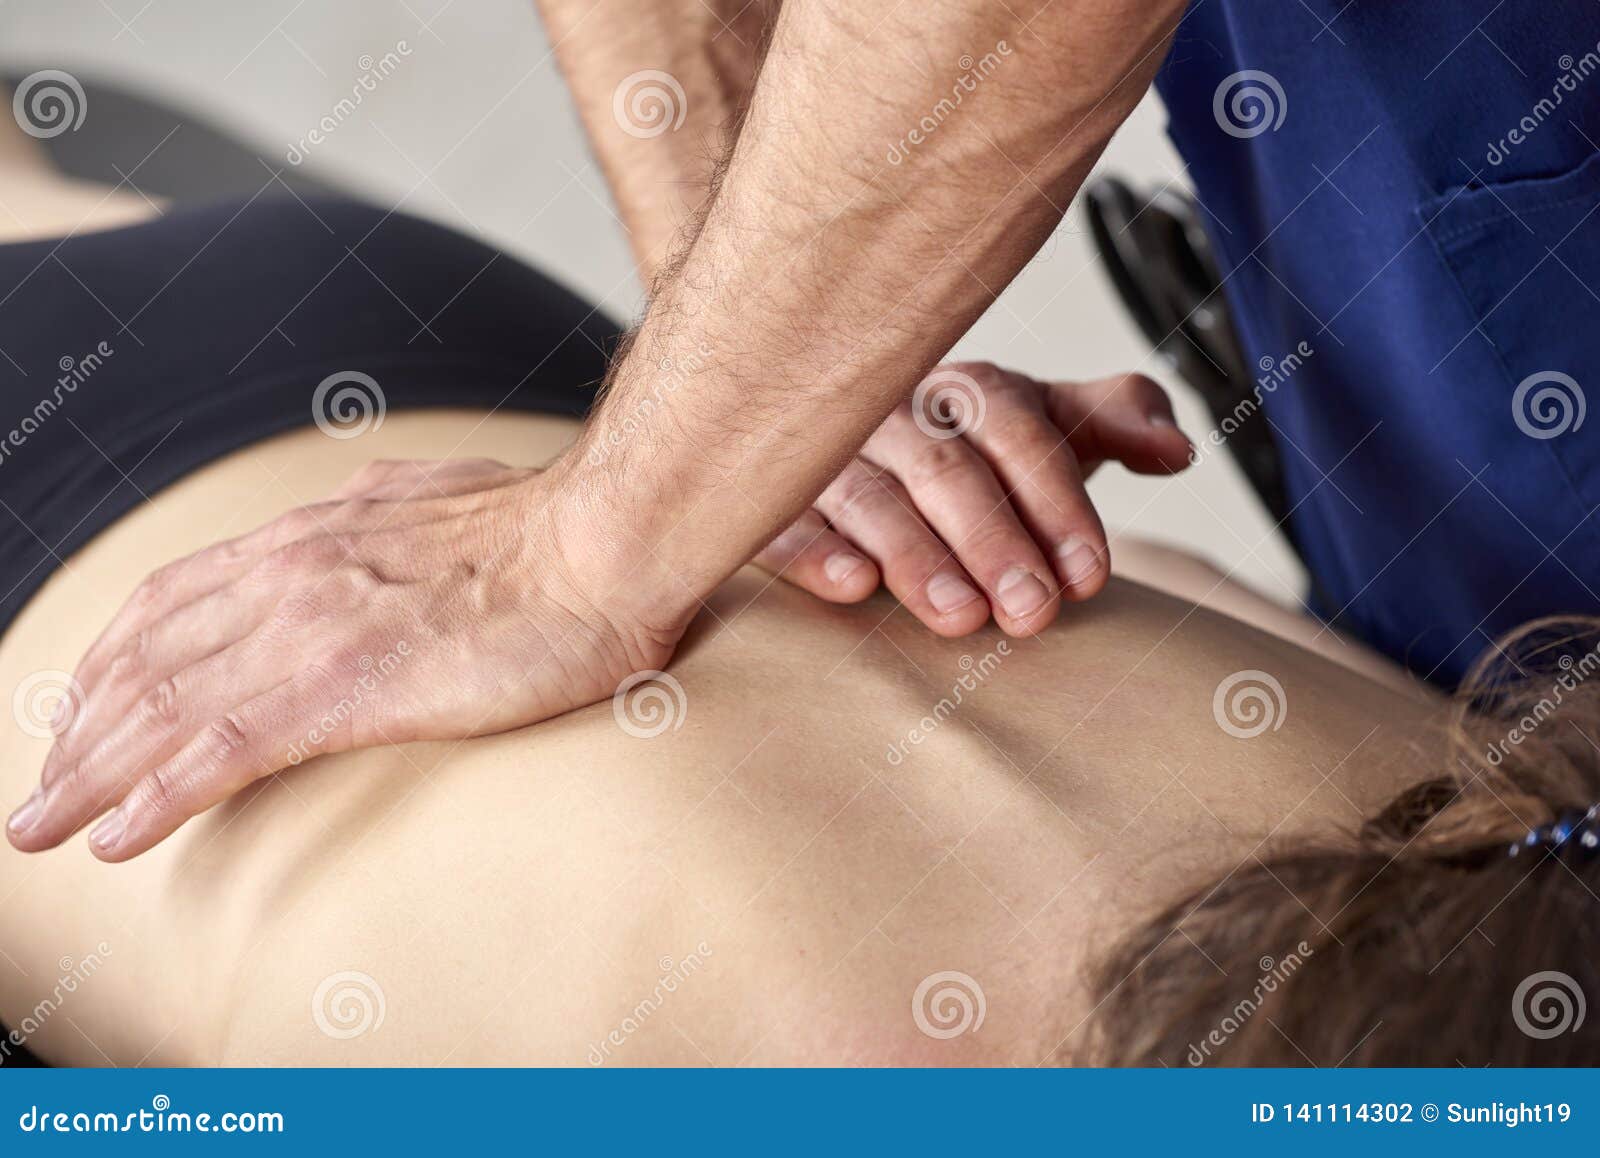 https://thumbs.dreamstime.com/z/young-woman-having-chiropractic-back-adjustment-physiotherapy-sports-injury-rehabilitation-osteopathy-alternative-medicine-pain-141114302.jpg